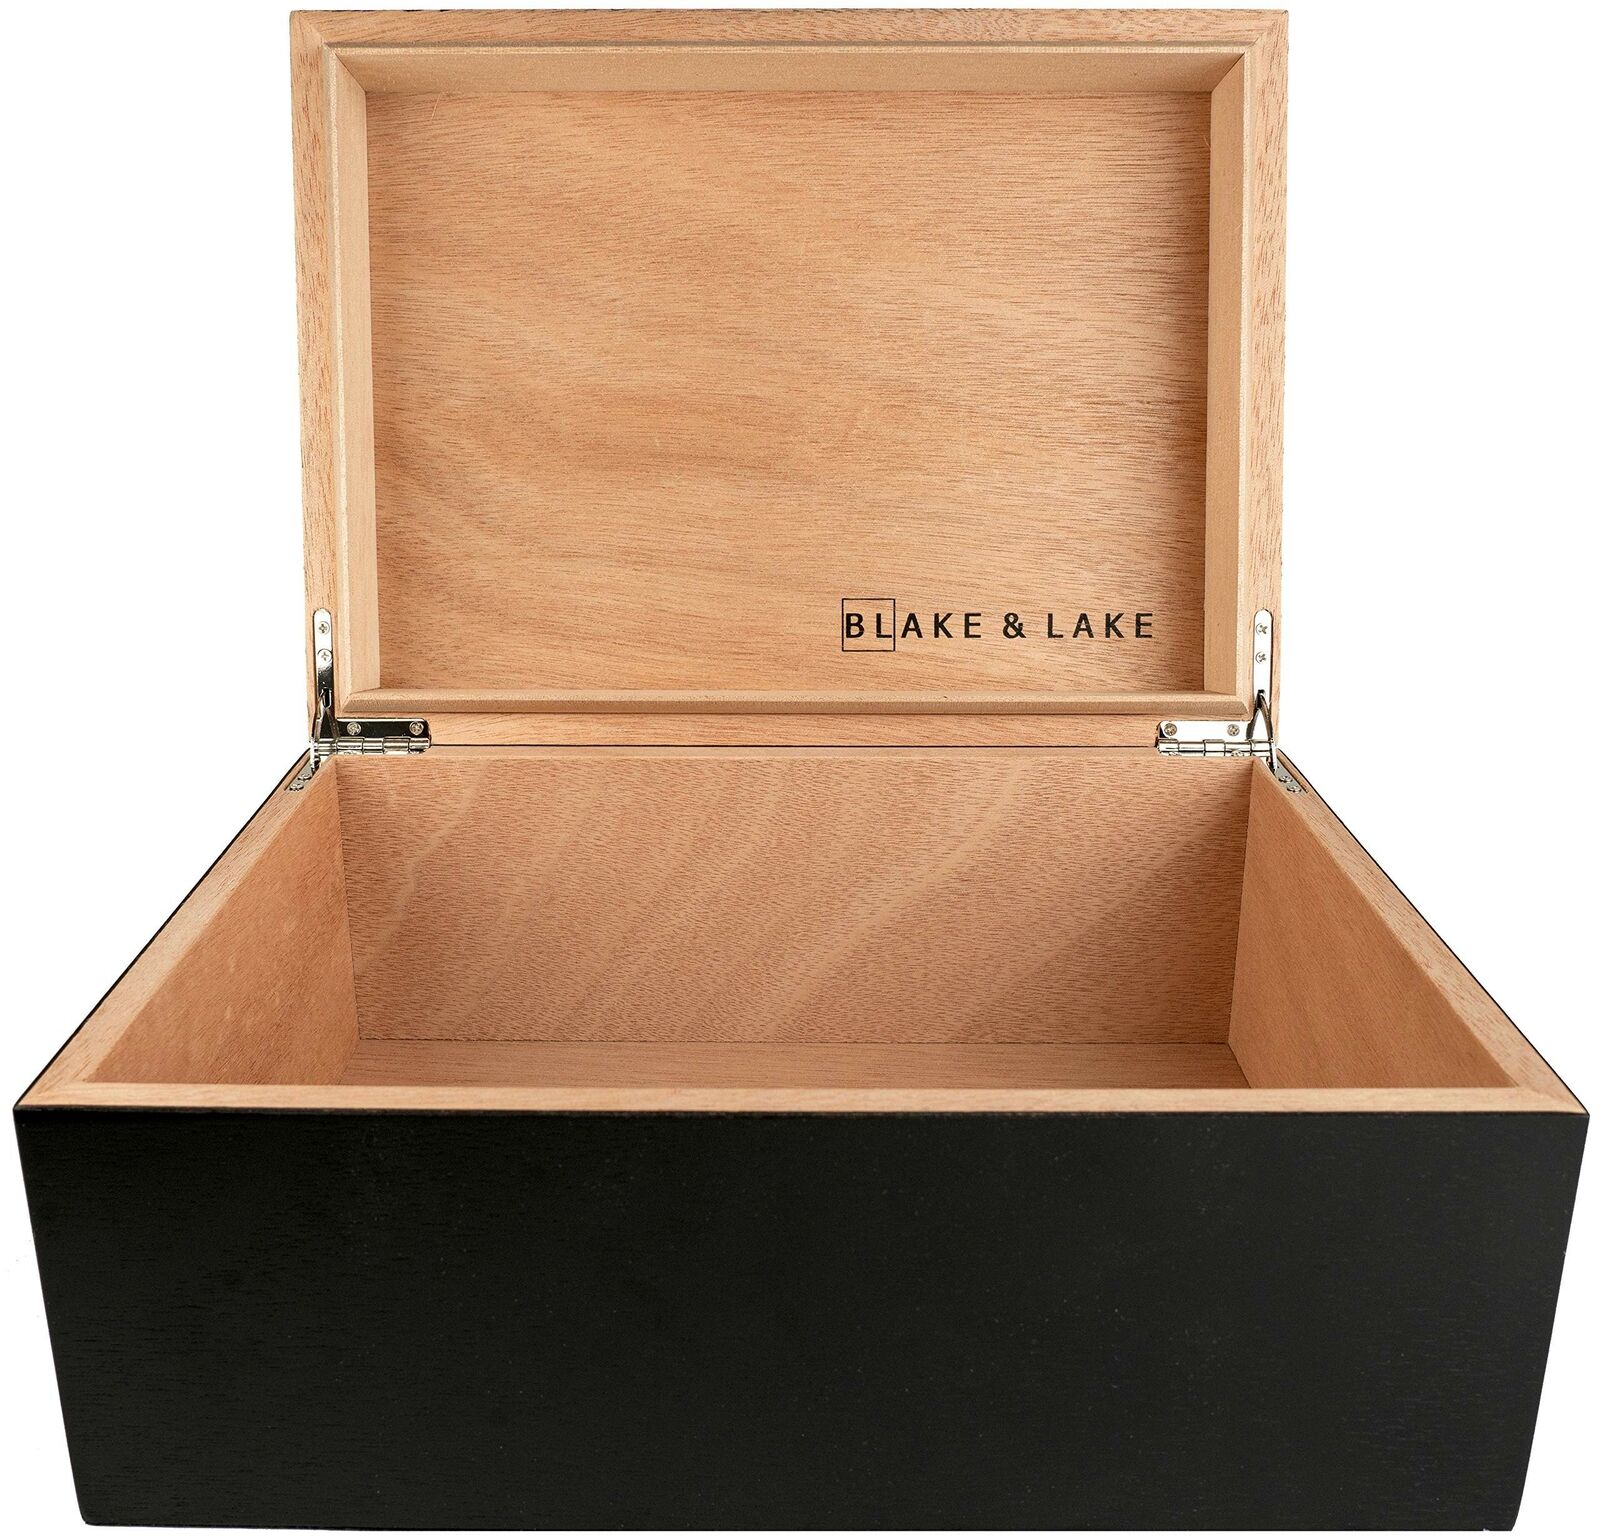 Large Wooden Box with Hinged Lid - Wood Storage Box with Lid - Black Stash Box